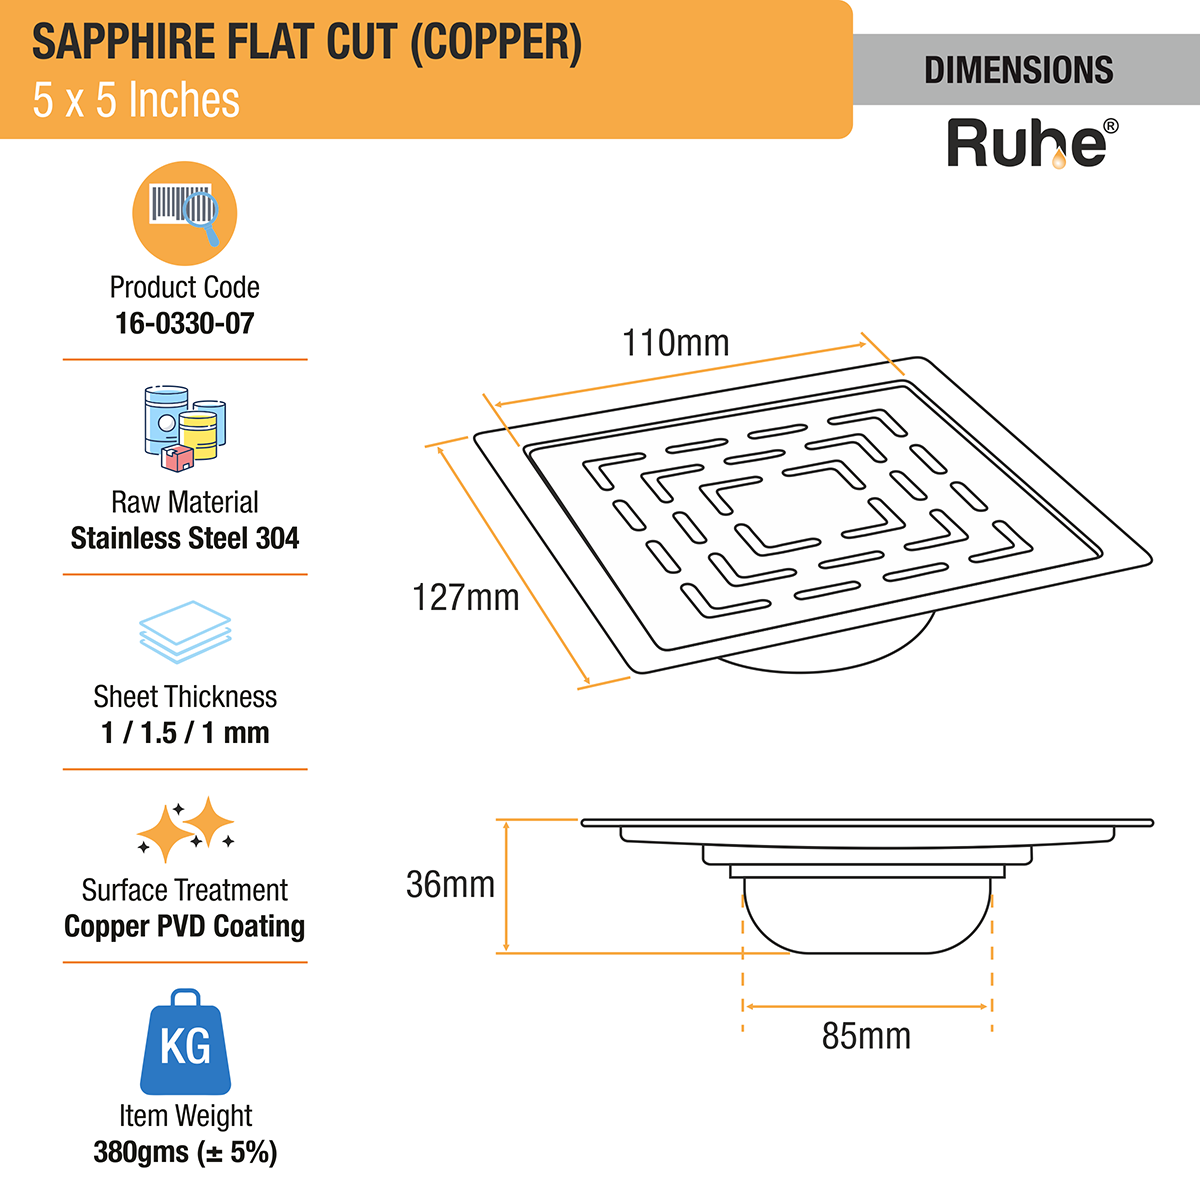 Sapphire Square Flat Cut Floor Drain in Antique Copper PVD Coating (5 x 5 Inches) dimensions and size